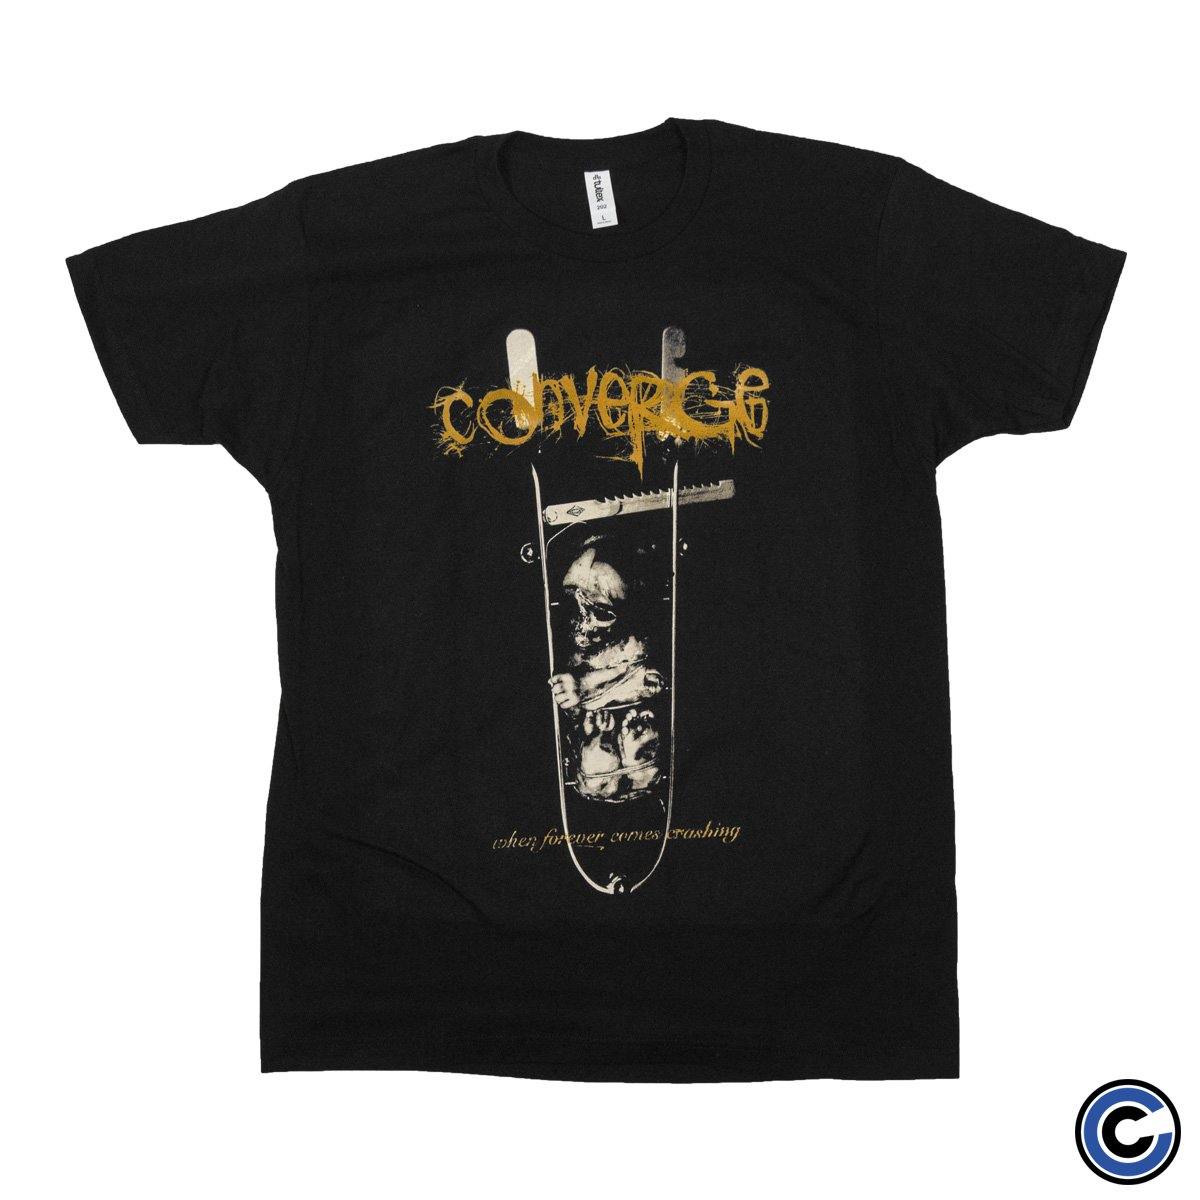 Buy – Converge "When Forever Comes Crashing" Shirt – Band & Music Merch – Cold Cuts Merch